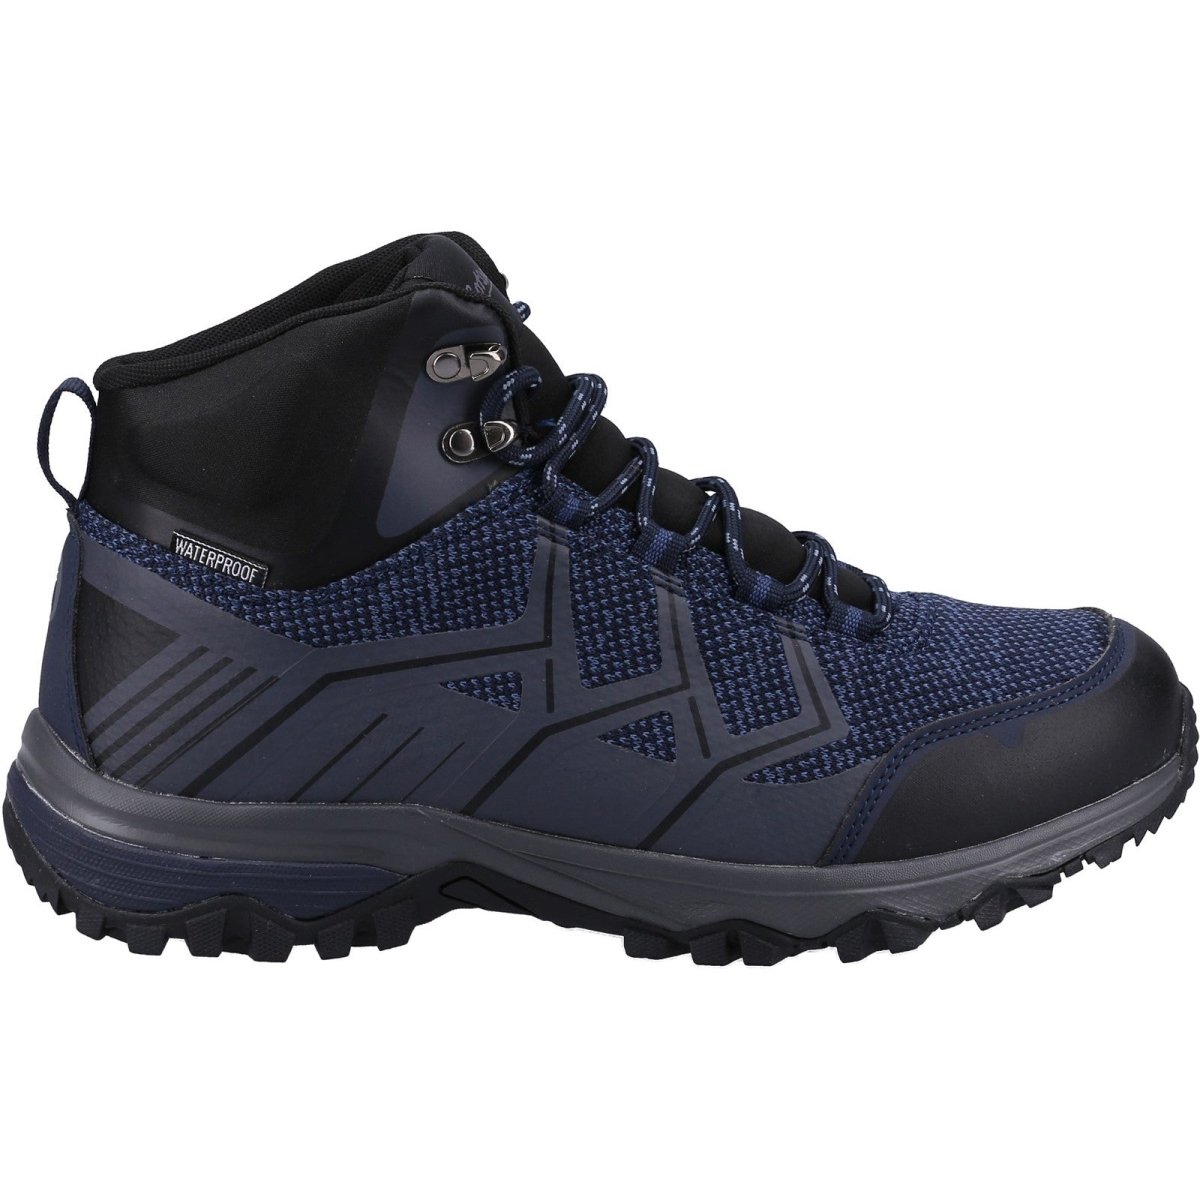 Cotswold Wychwood Mid Mens Waterproof Hiking Boots - Shoe Store Direct